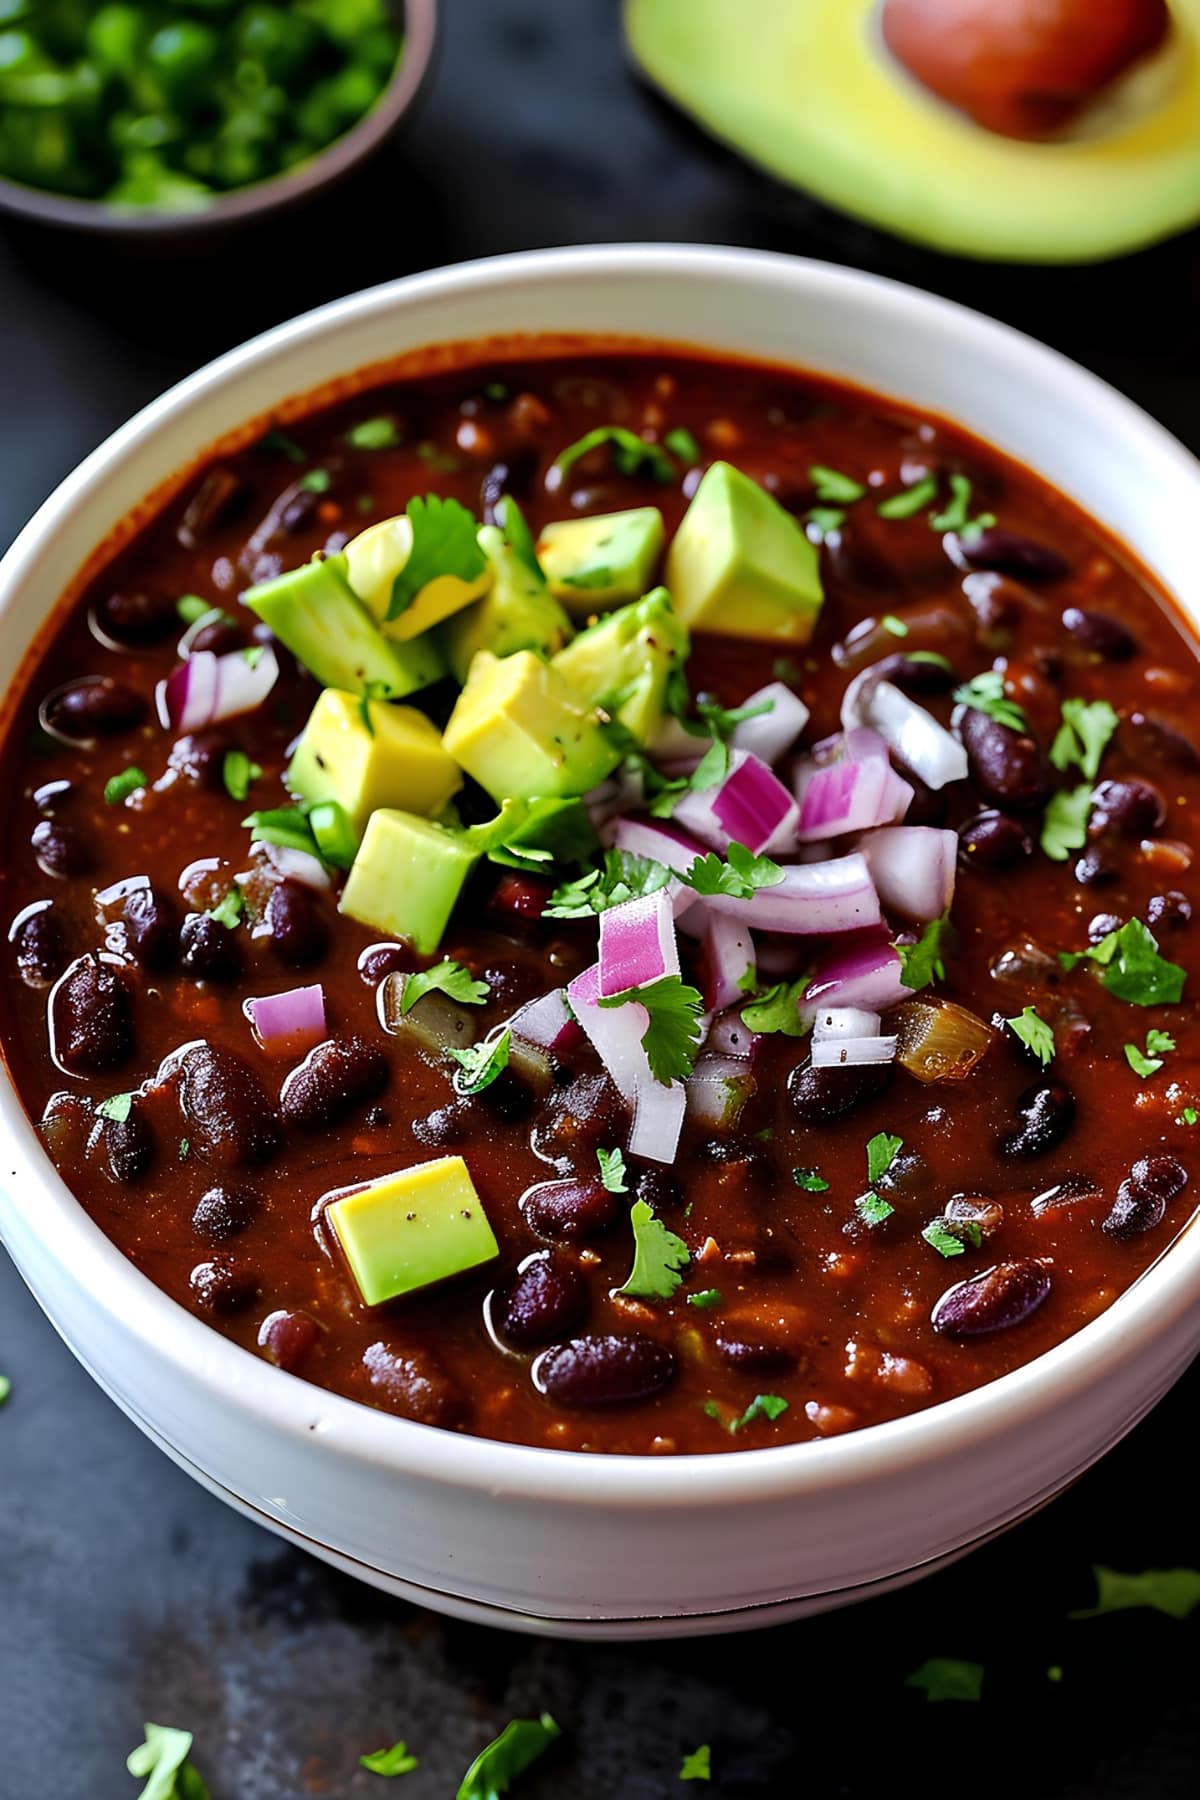 Chipotle black bean soup topped with avocados and chopped onions, a delicious and nutritious dish